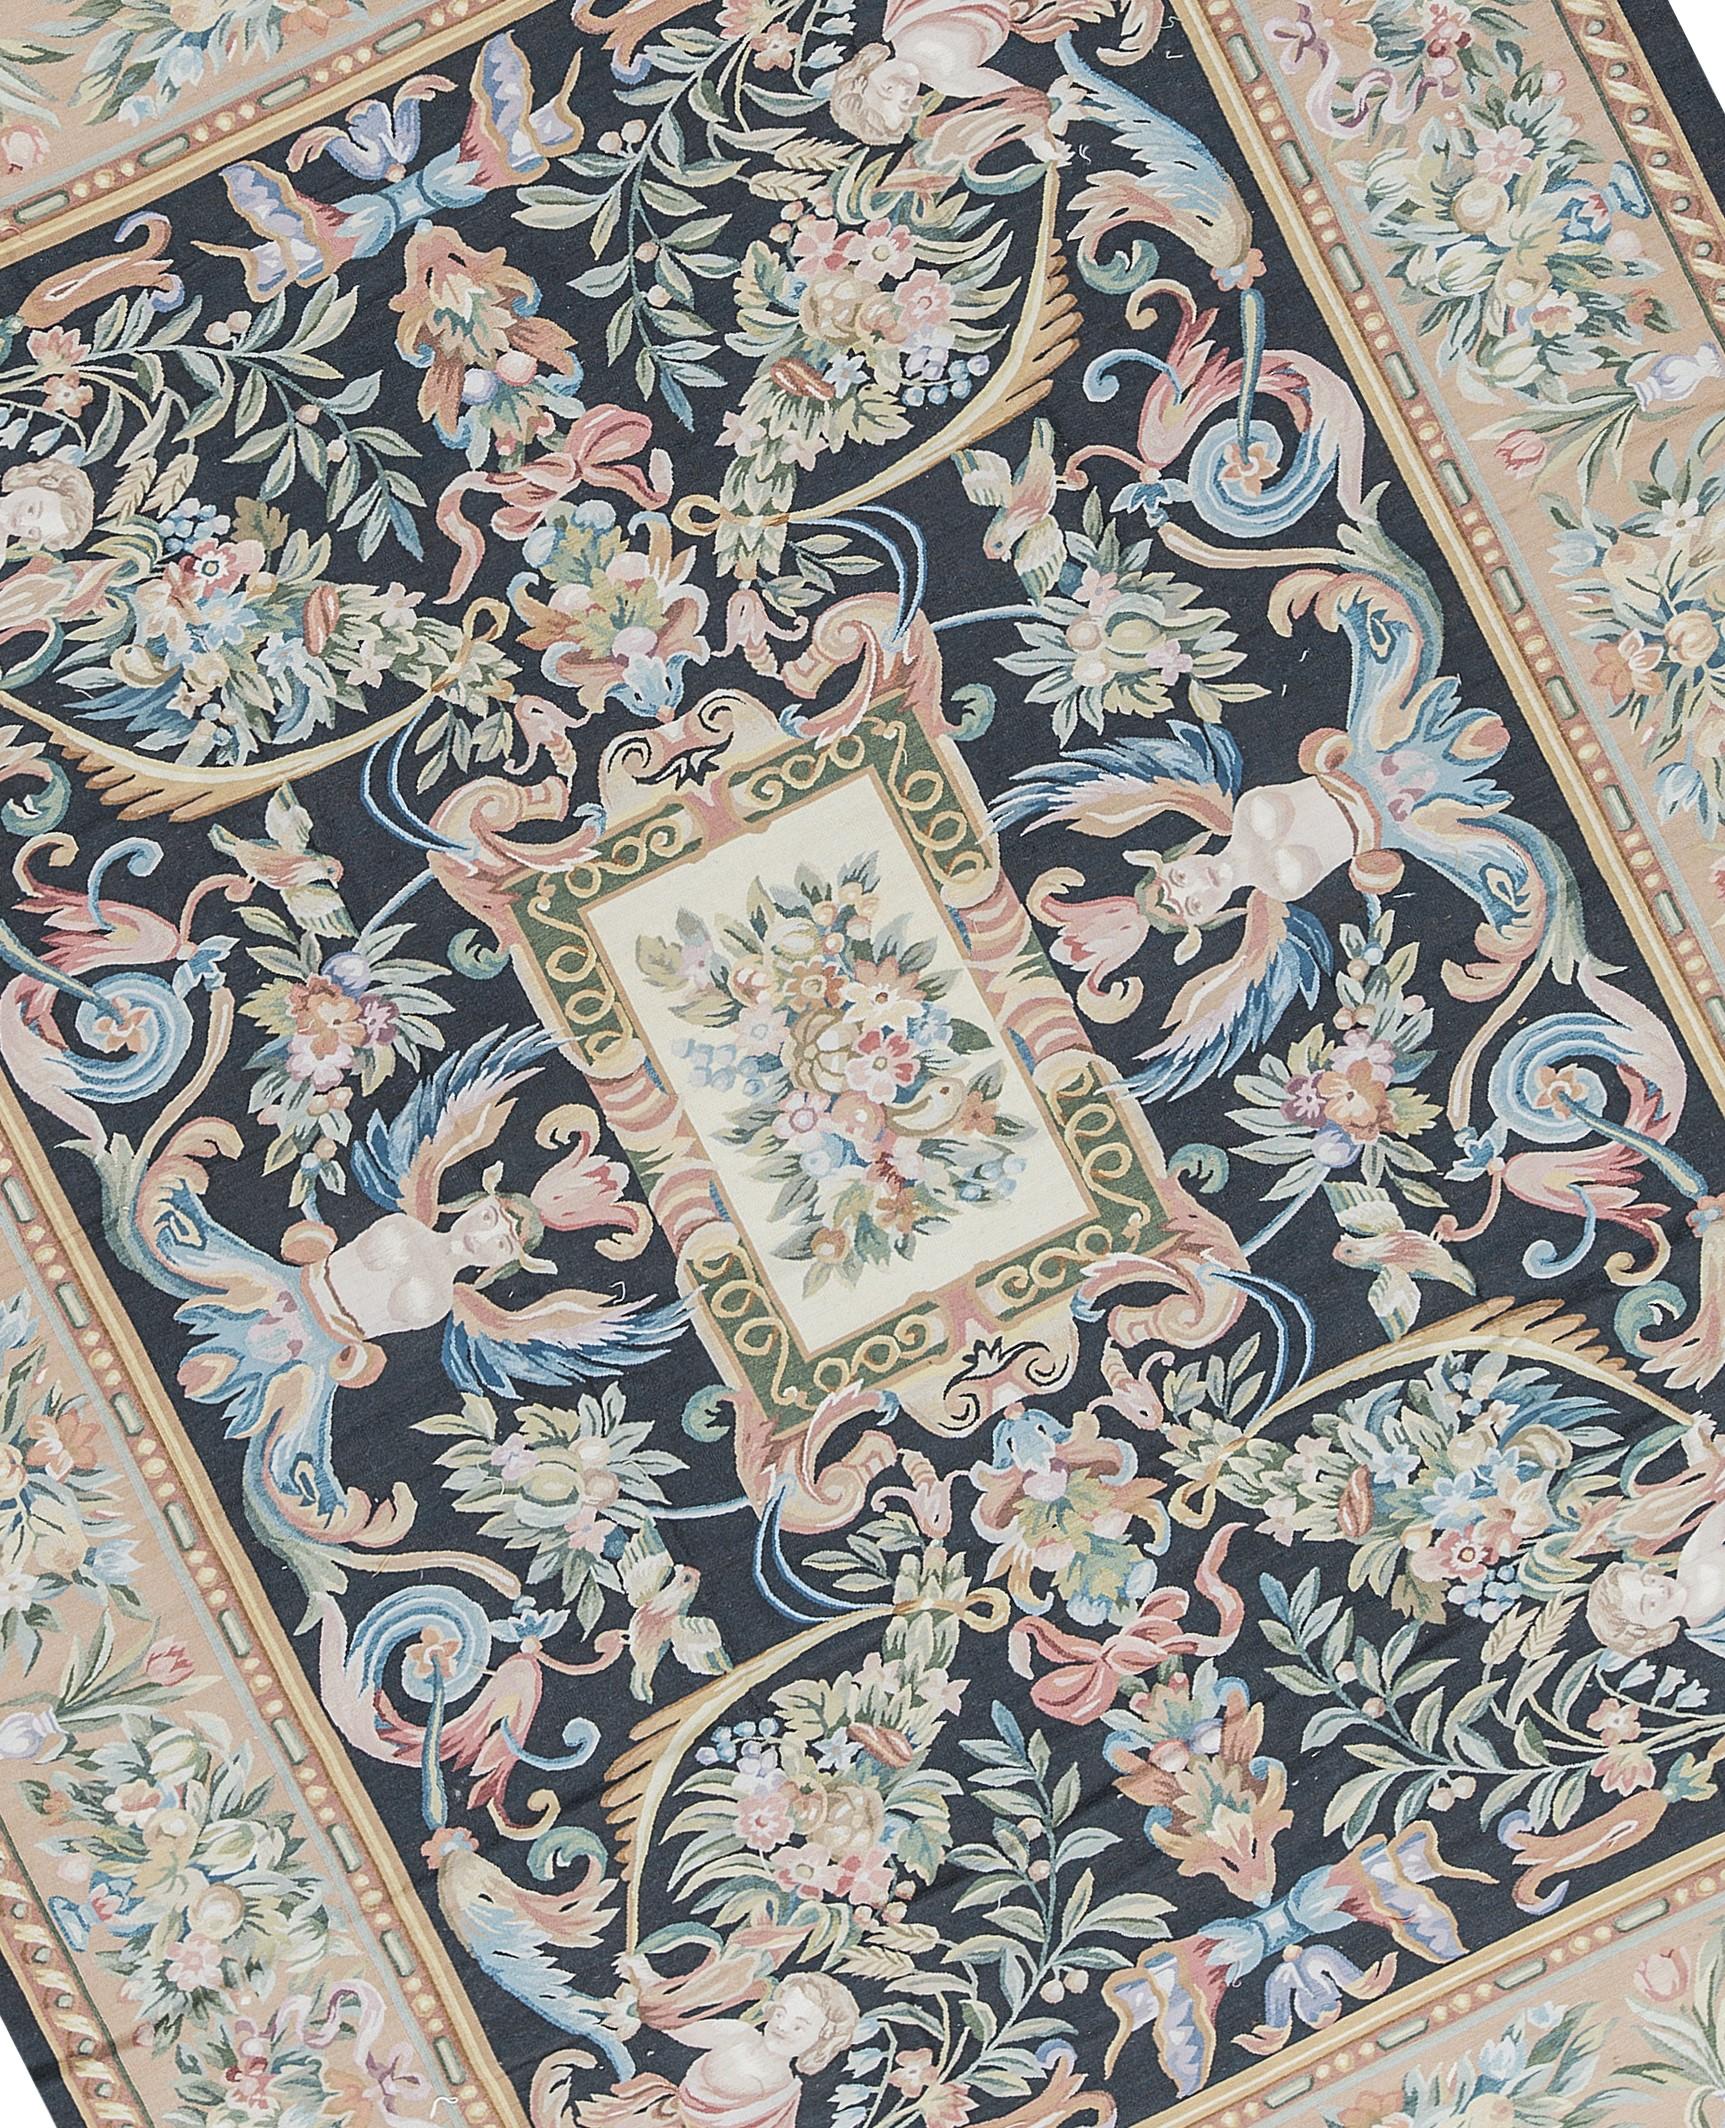 Handwoven recreation of the Classic French flat-weave Aubusson rugs that have been found in the finest homes and palaces since the late 17th century. Size 9' 3'' x 11' 8''.